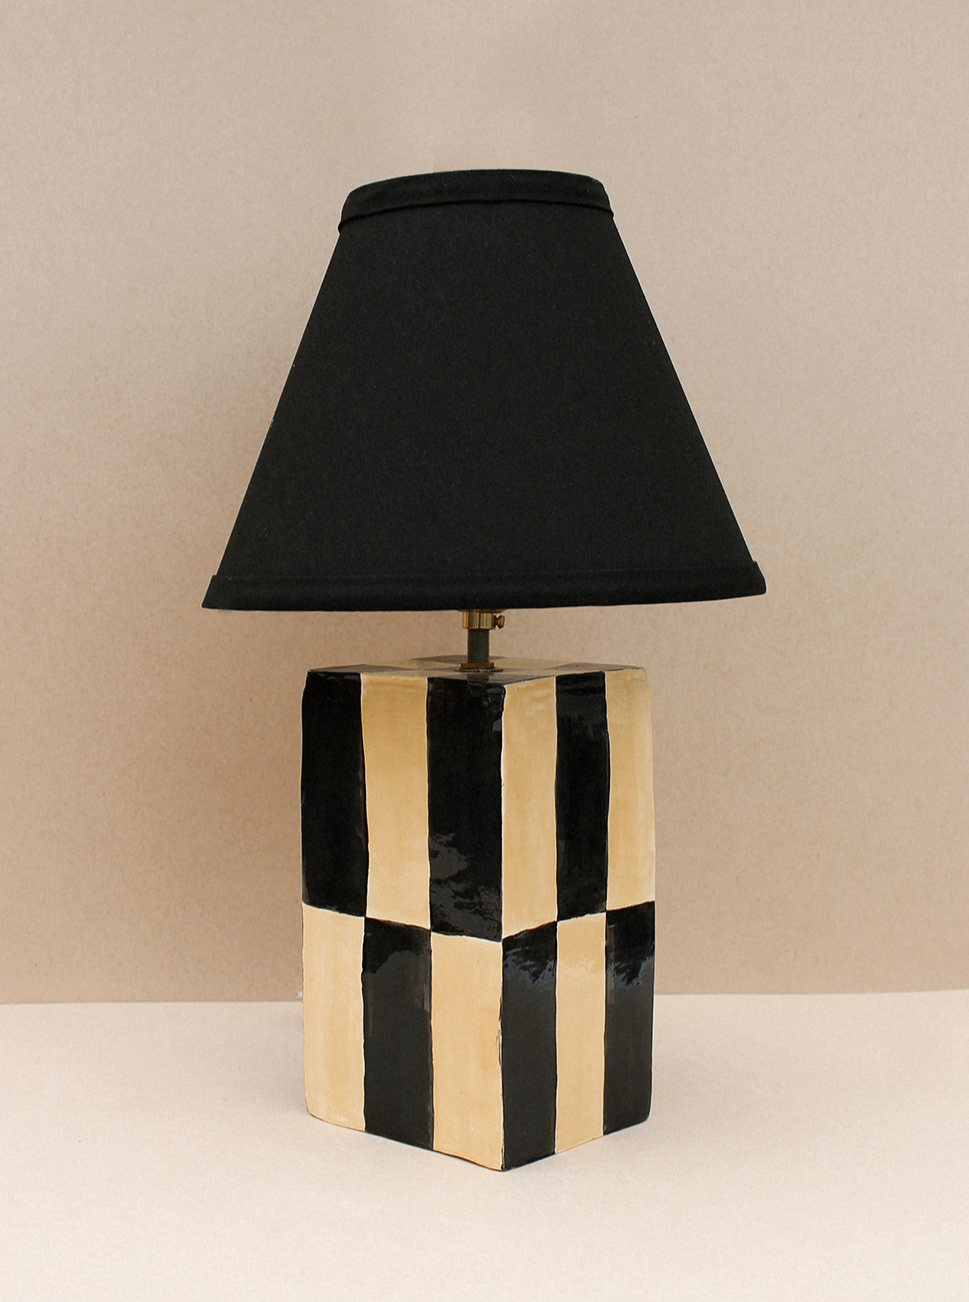 A Socorro Lamp with a black lampshade, mounted on a square base decorated with black and beige vertical stripes against a plain beige background. (Brand Name: Casa Veronica)